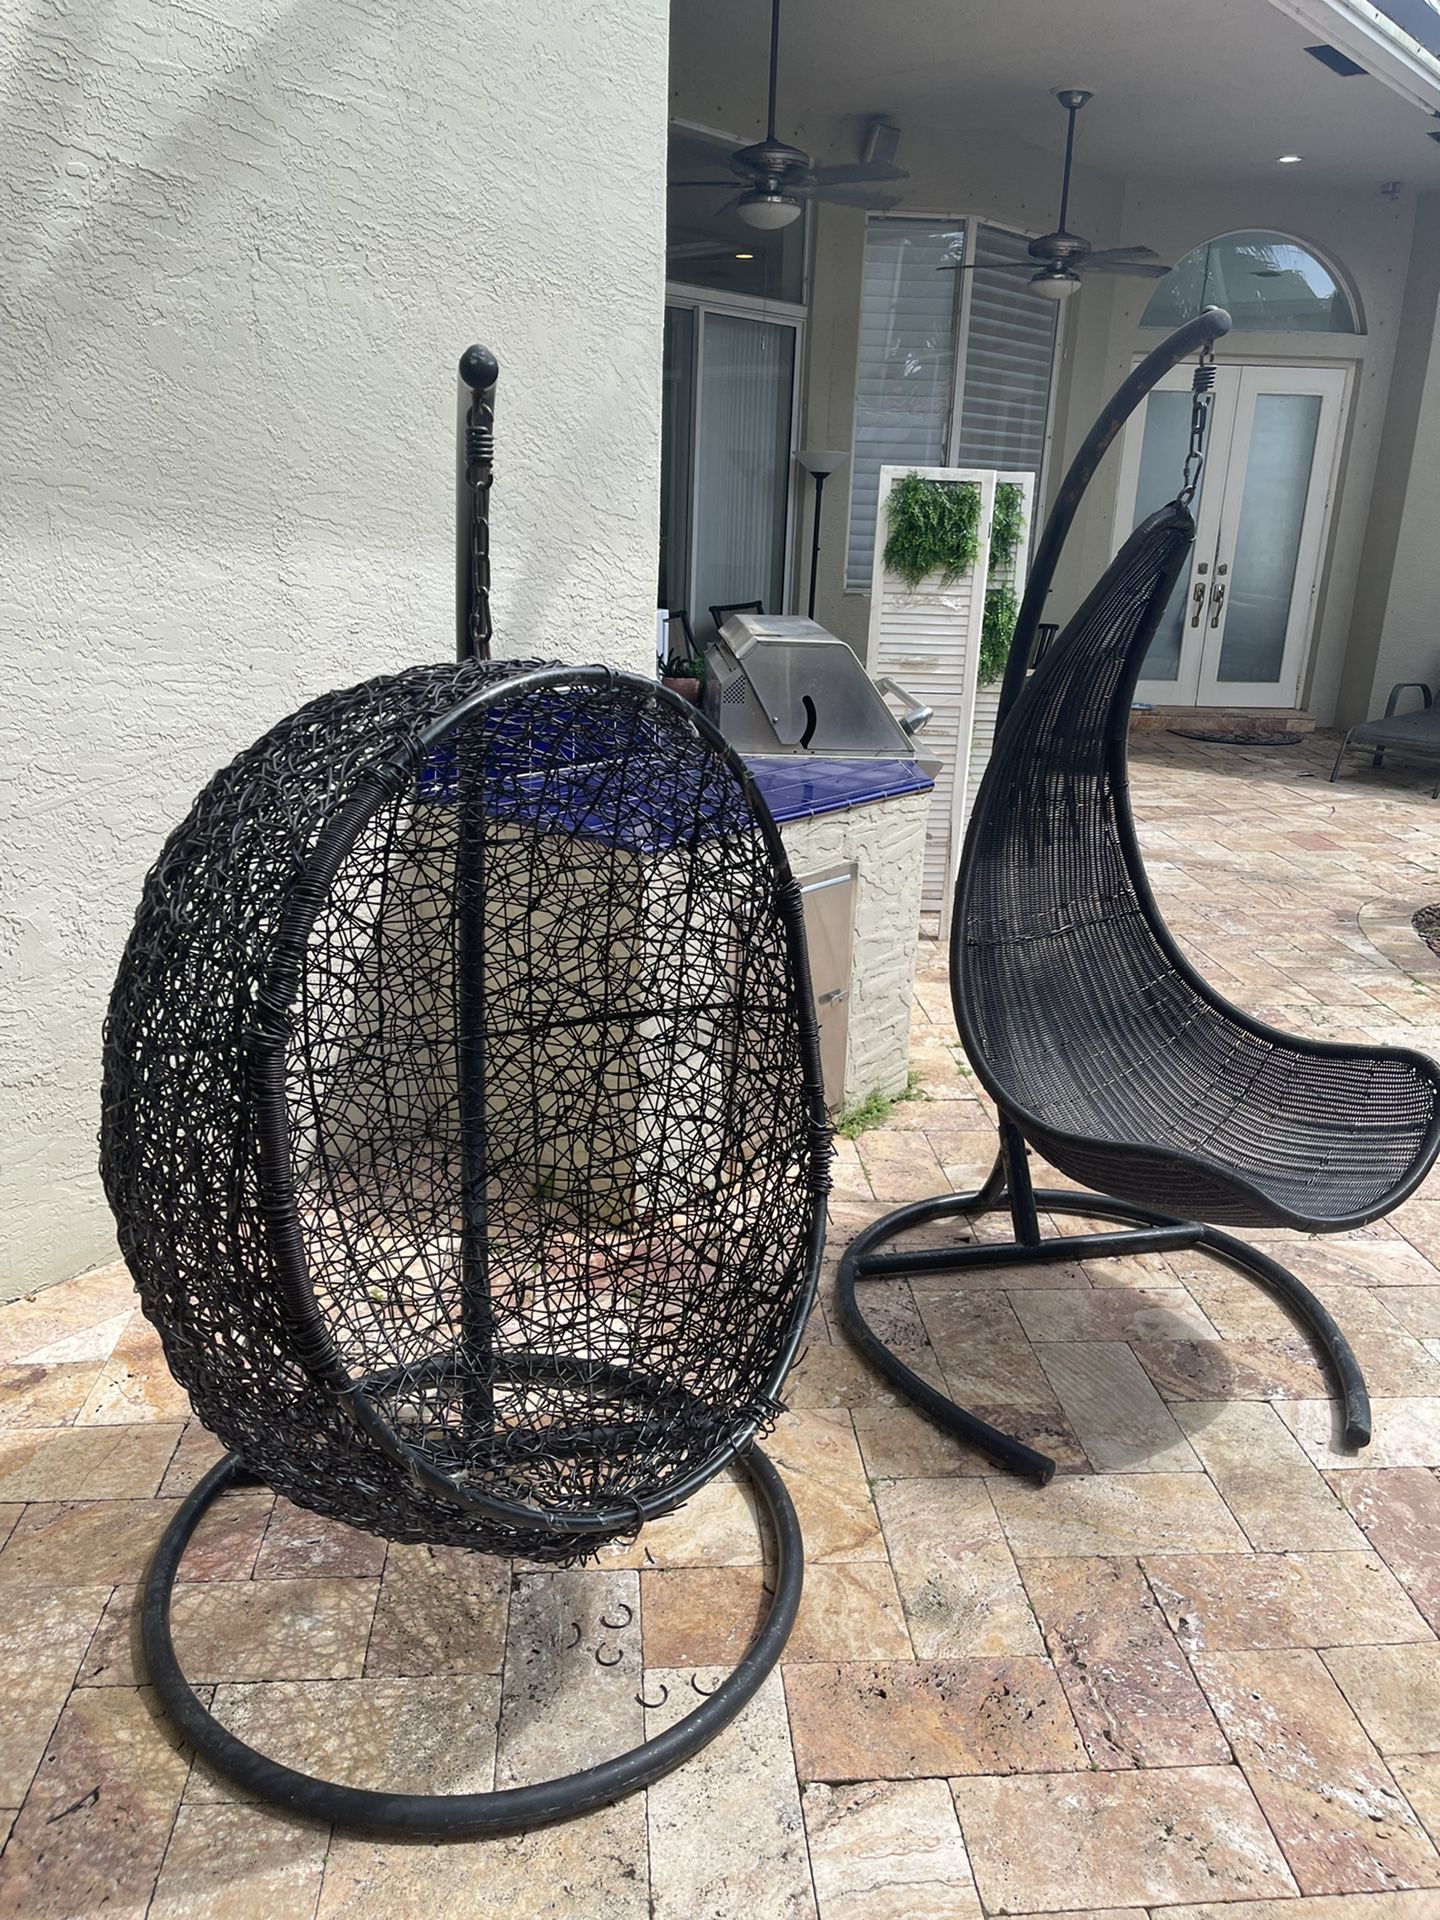 2 Hanging Egg Chairs For Price Of 1!